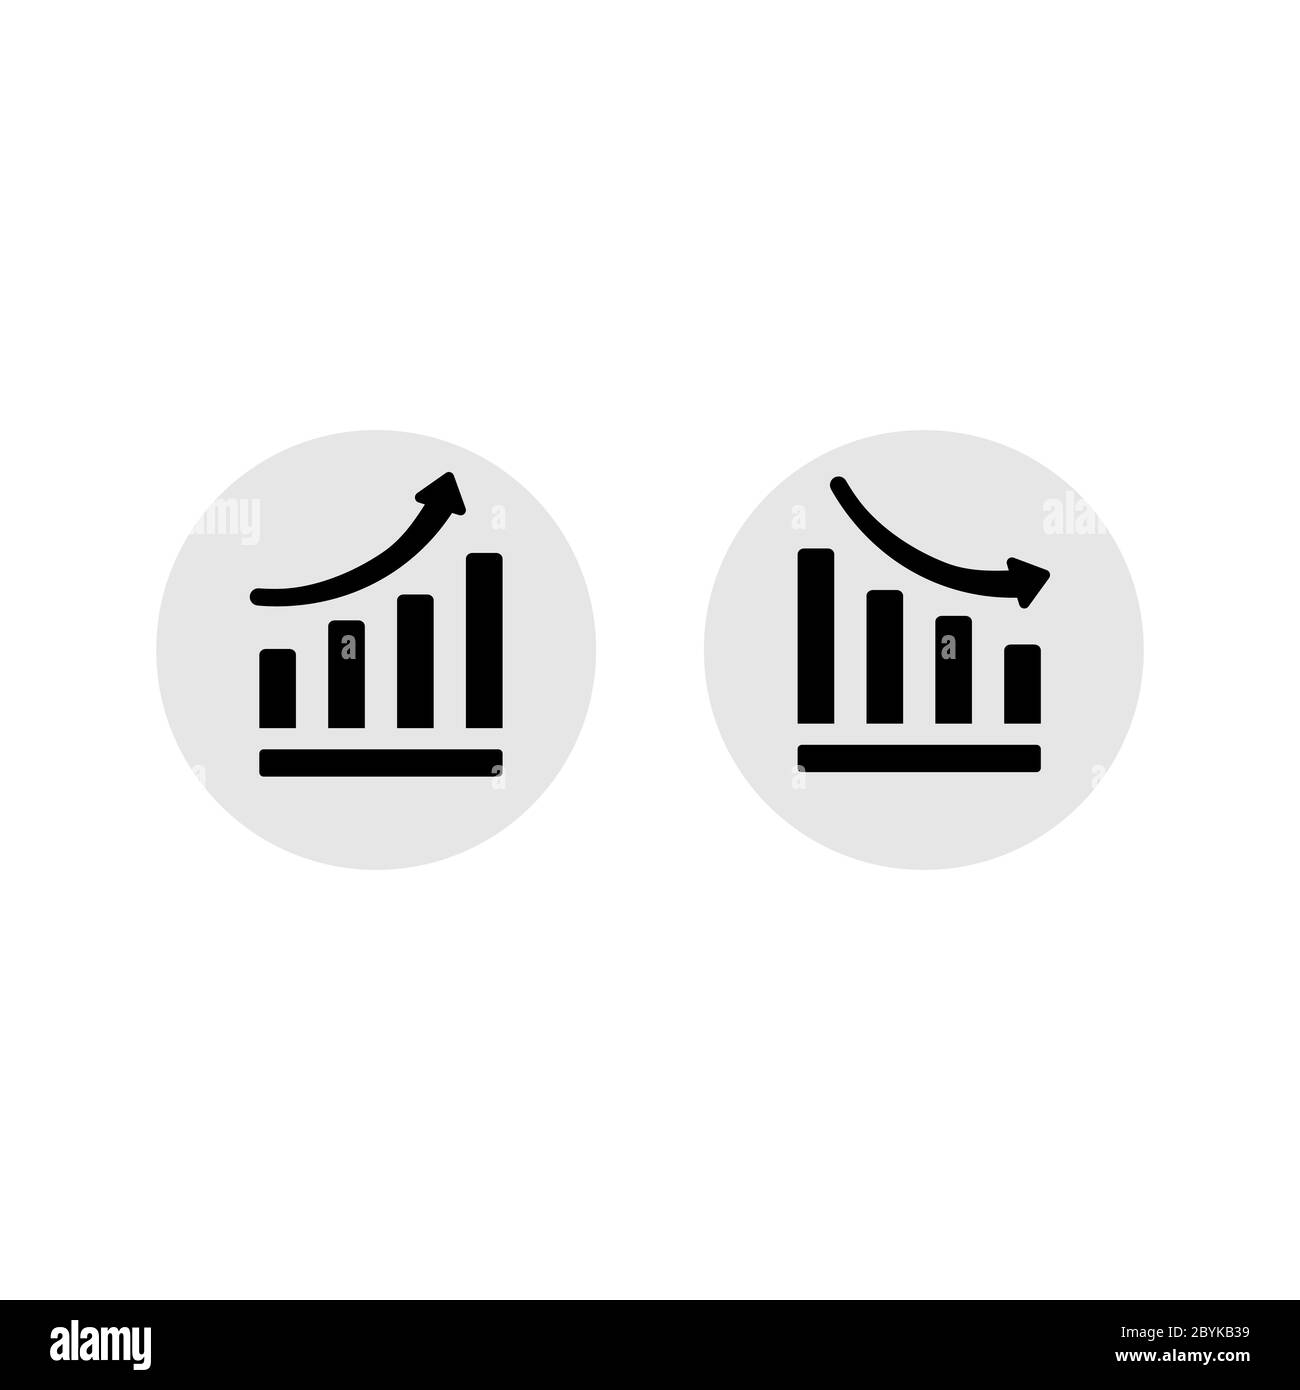 Growth graph, business decline graph or diagram with arrow up, down icon design black symbol isolated on white background. Vector EPS 10. Stock Vector